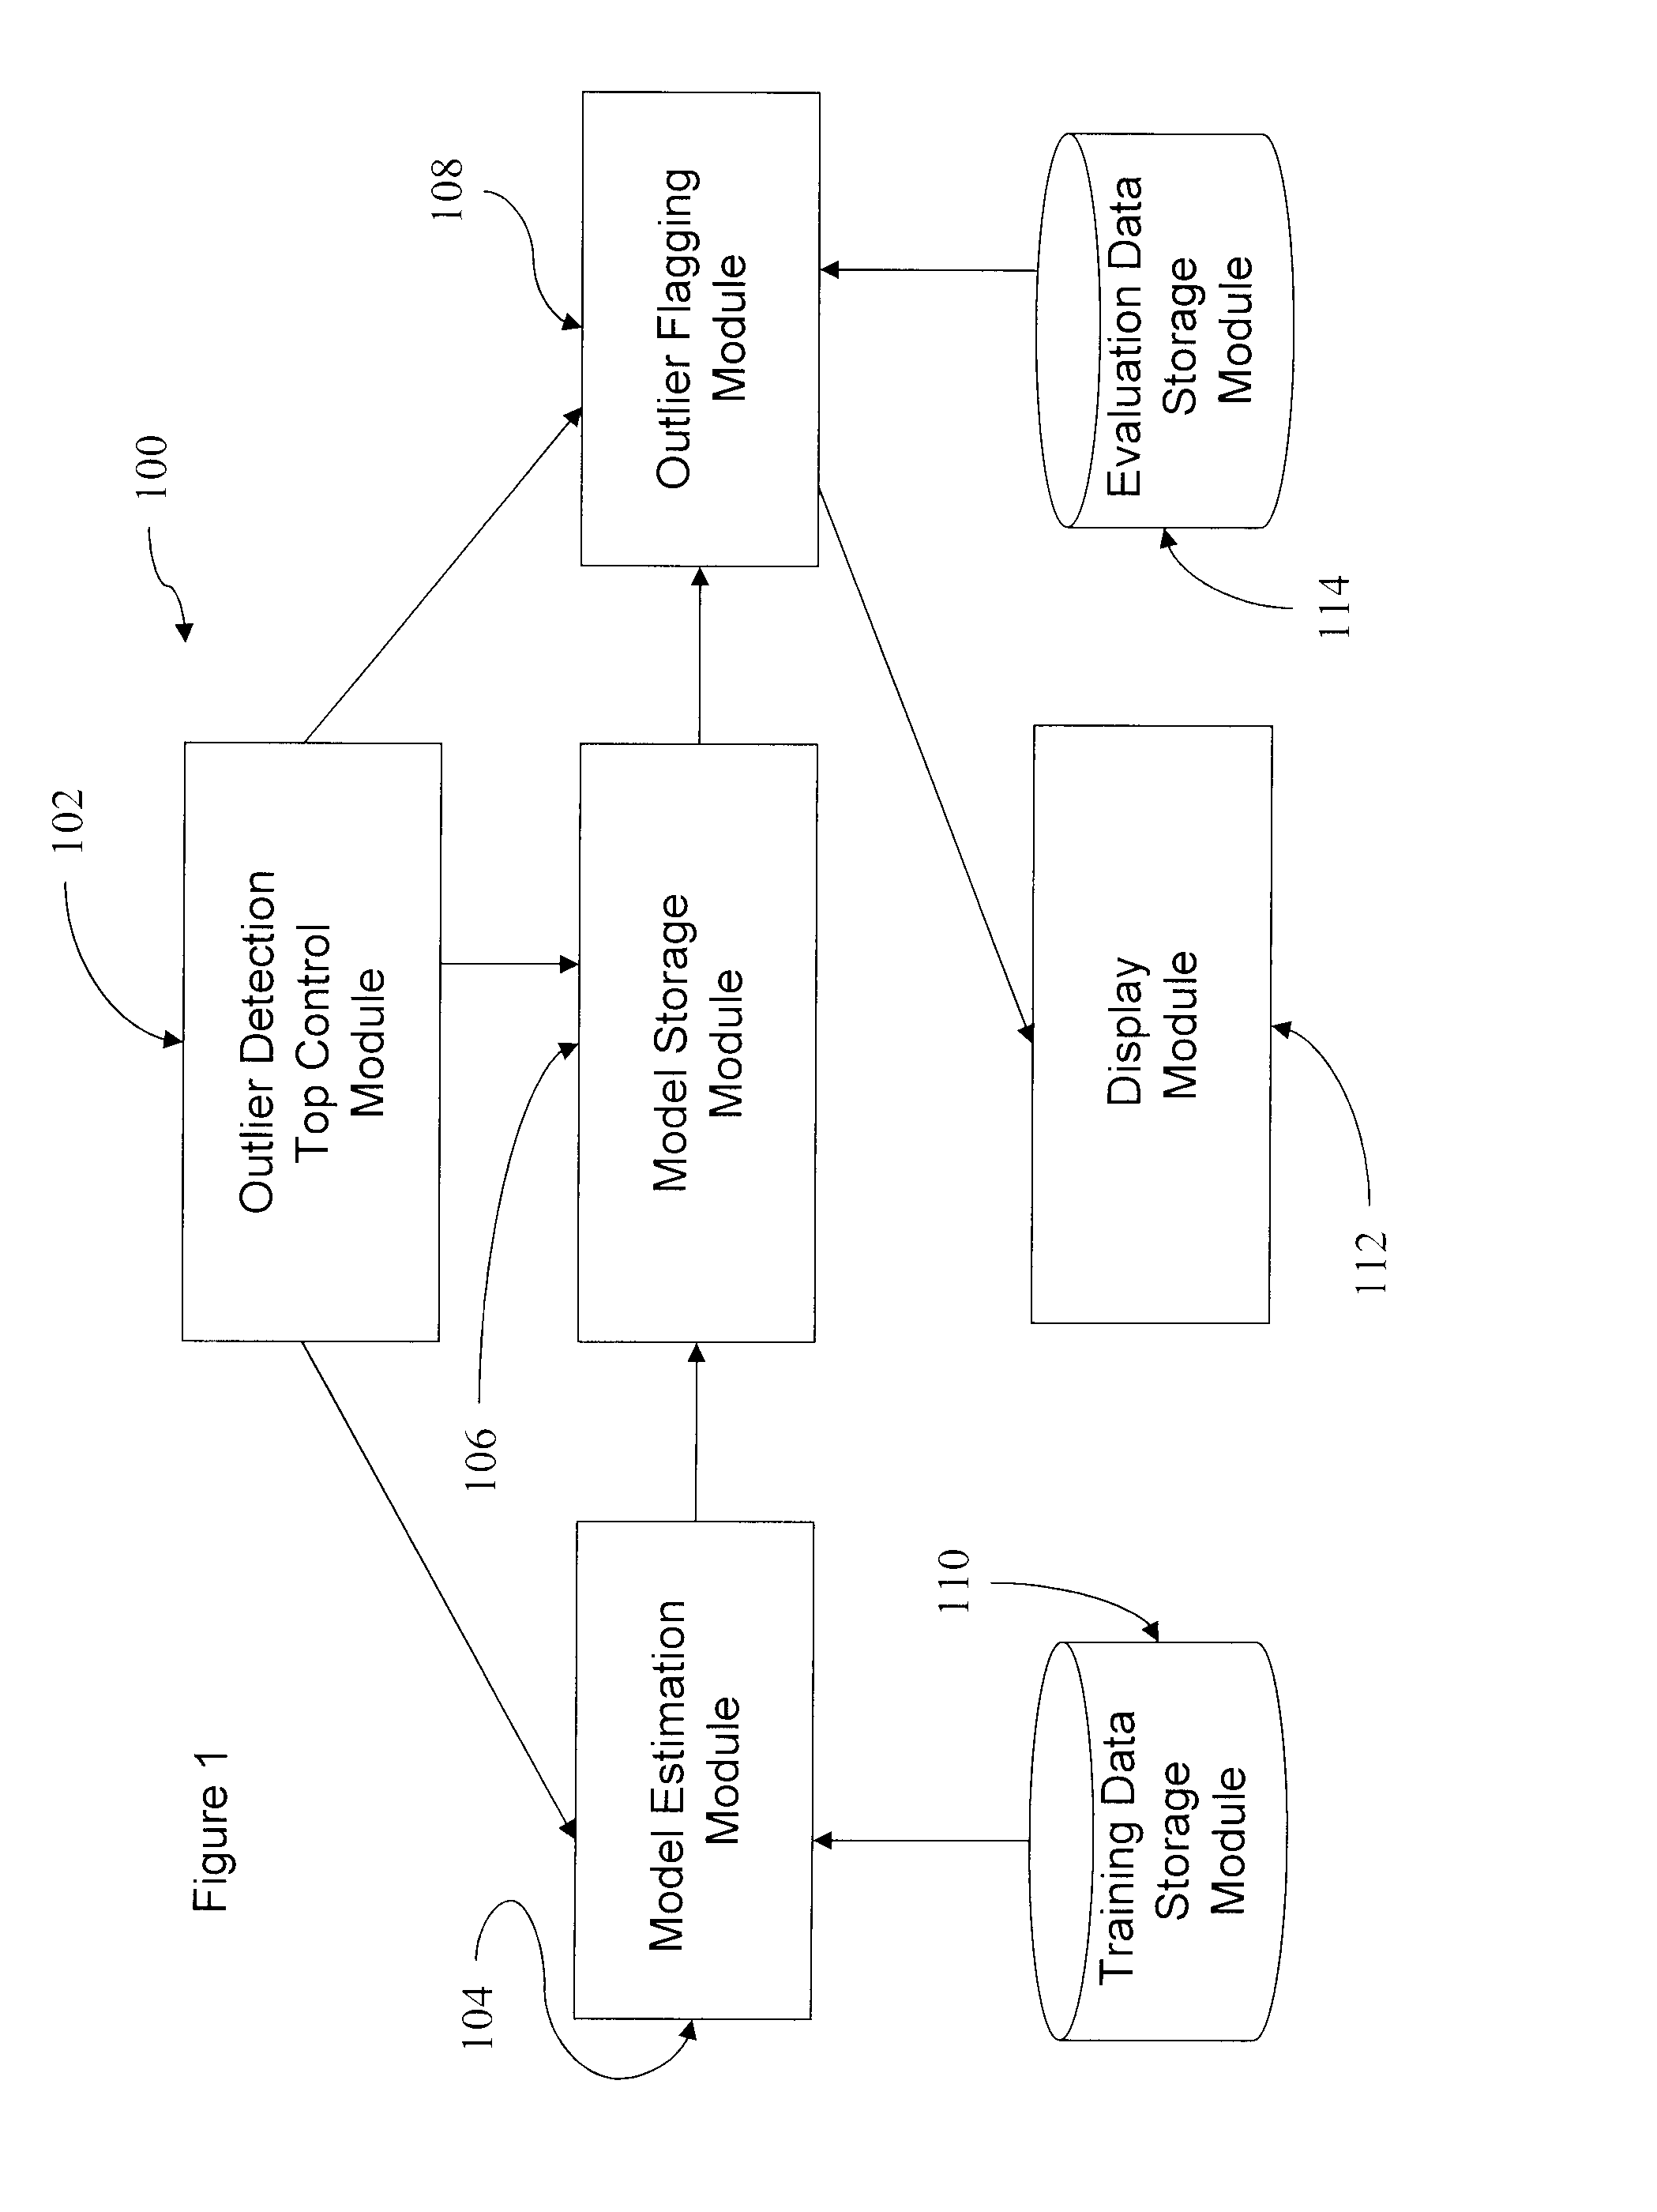 Method and system for causal modeling and outlier detection